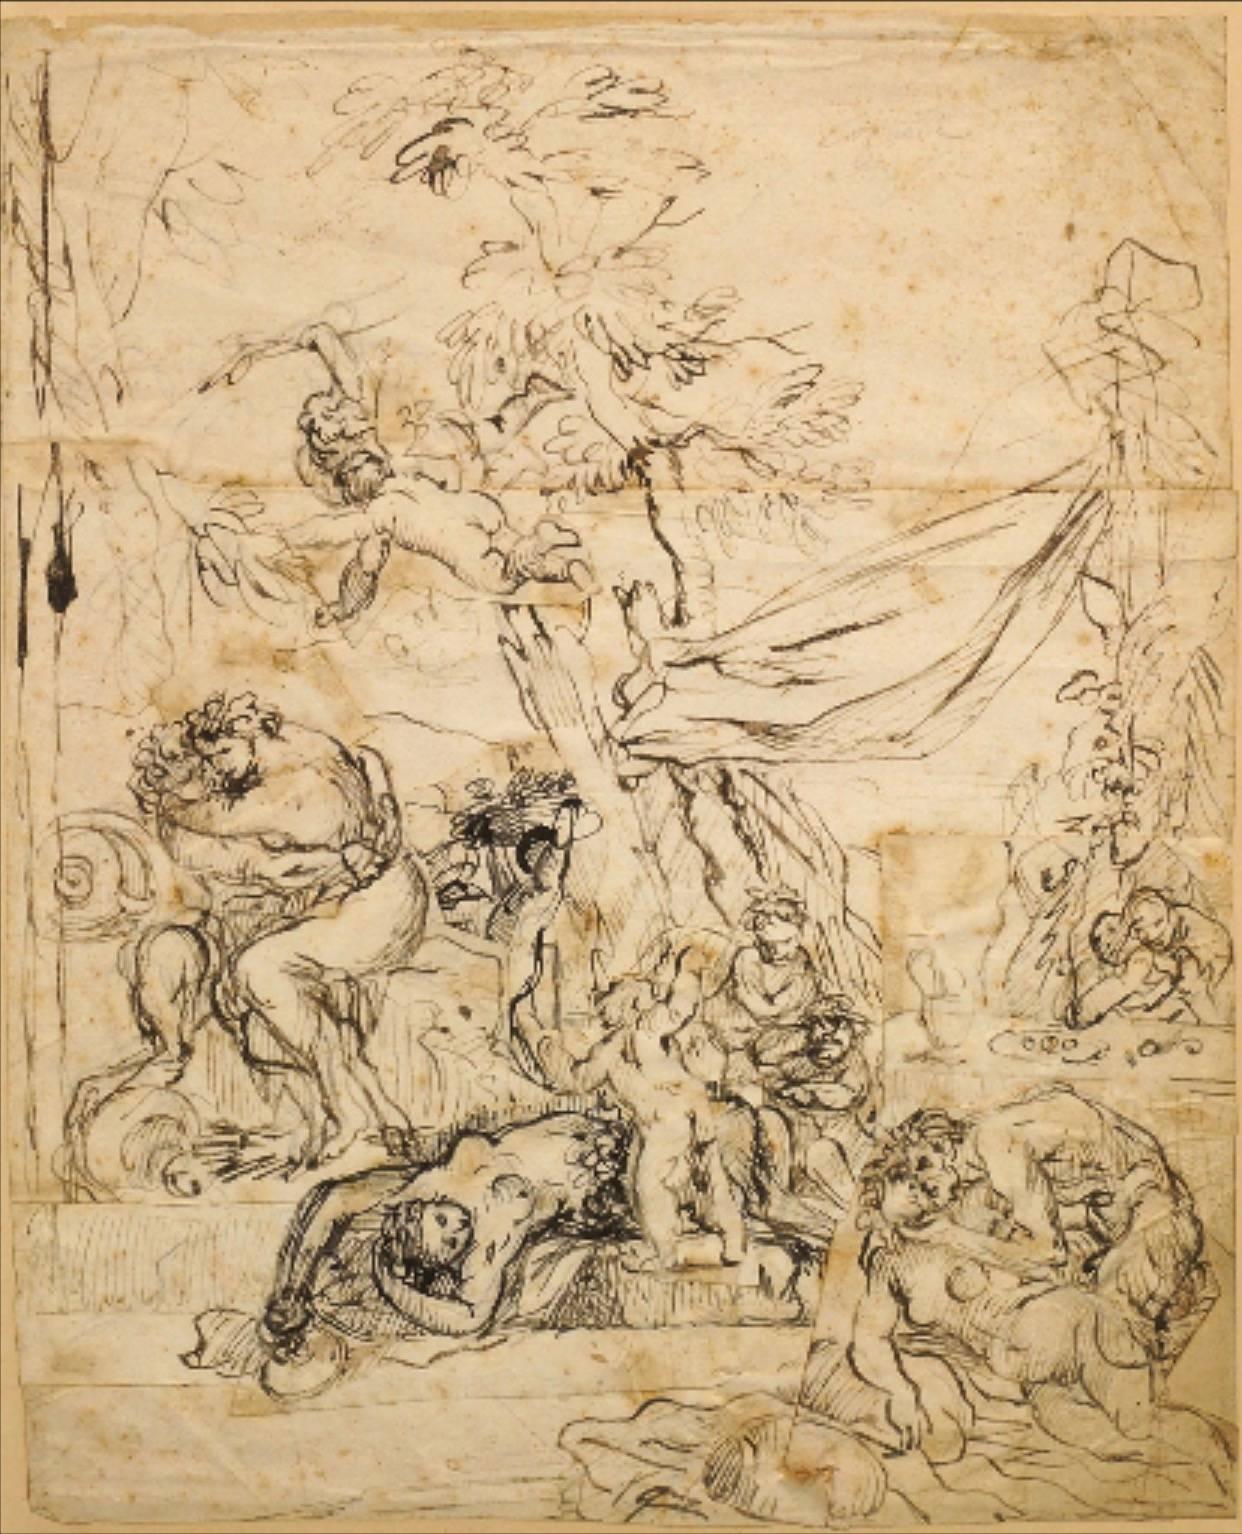 Unknown Nude - 17th Century Flemish Old Master Drawing - Erotic Orgy Scene